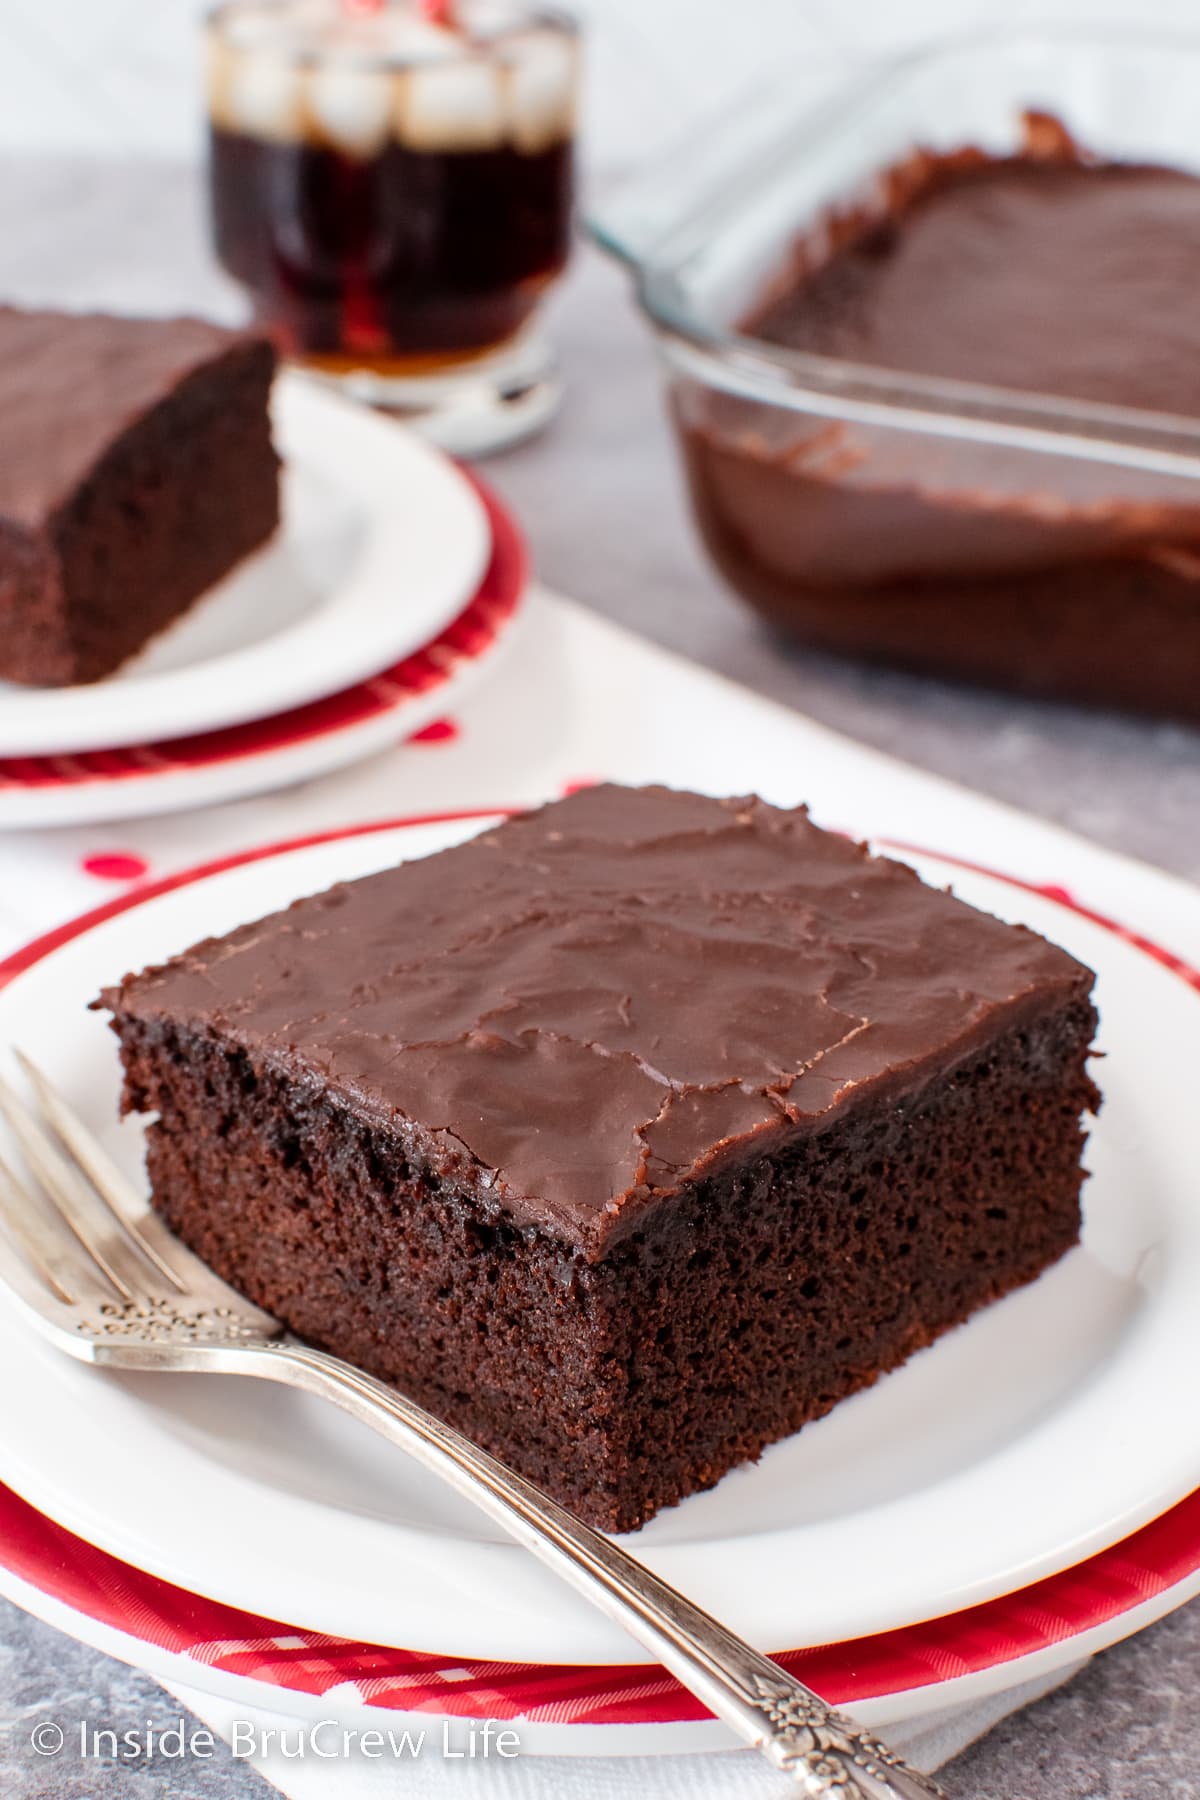 Squares of homemade chocolate cake on plates.